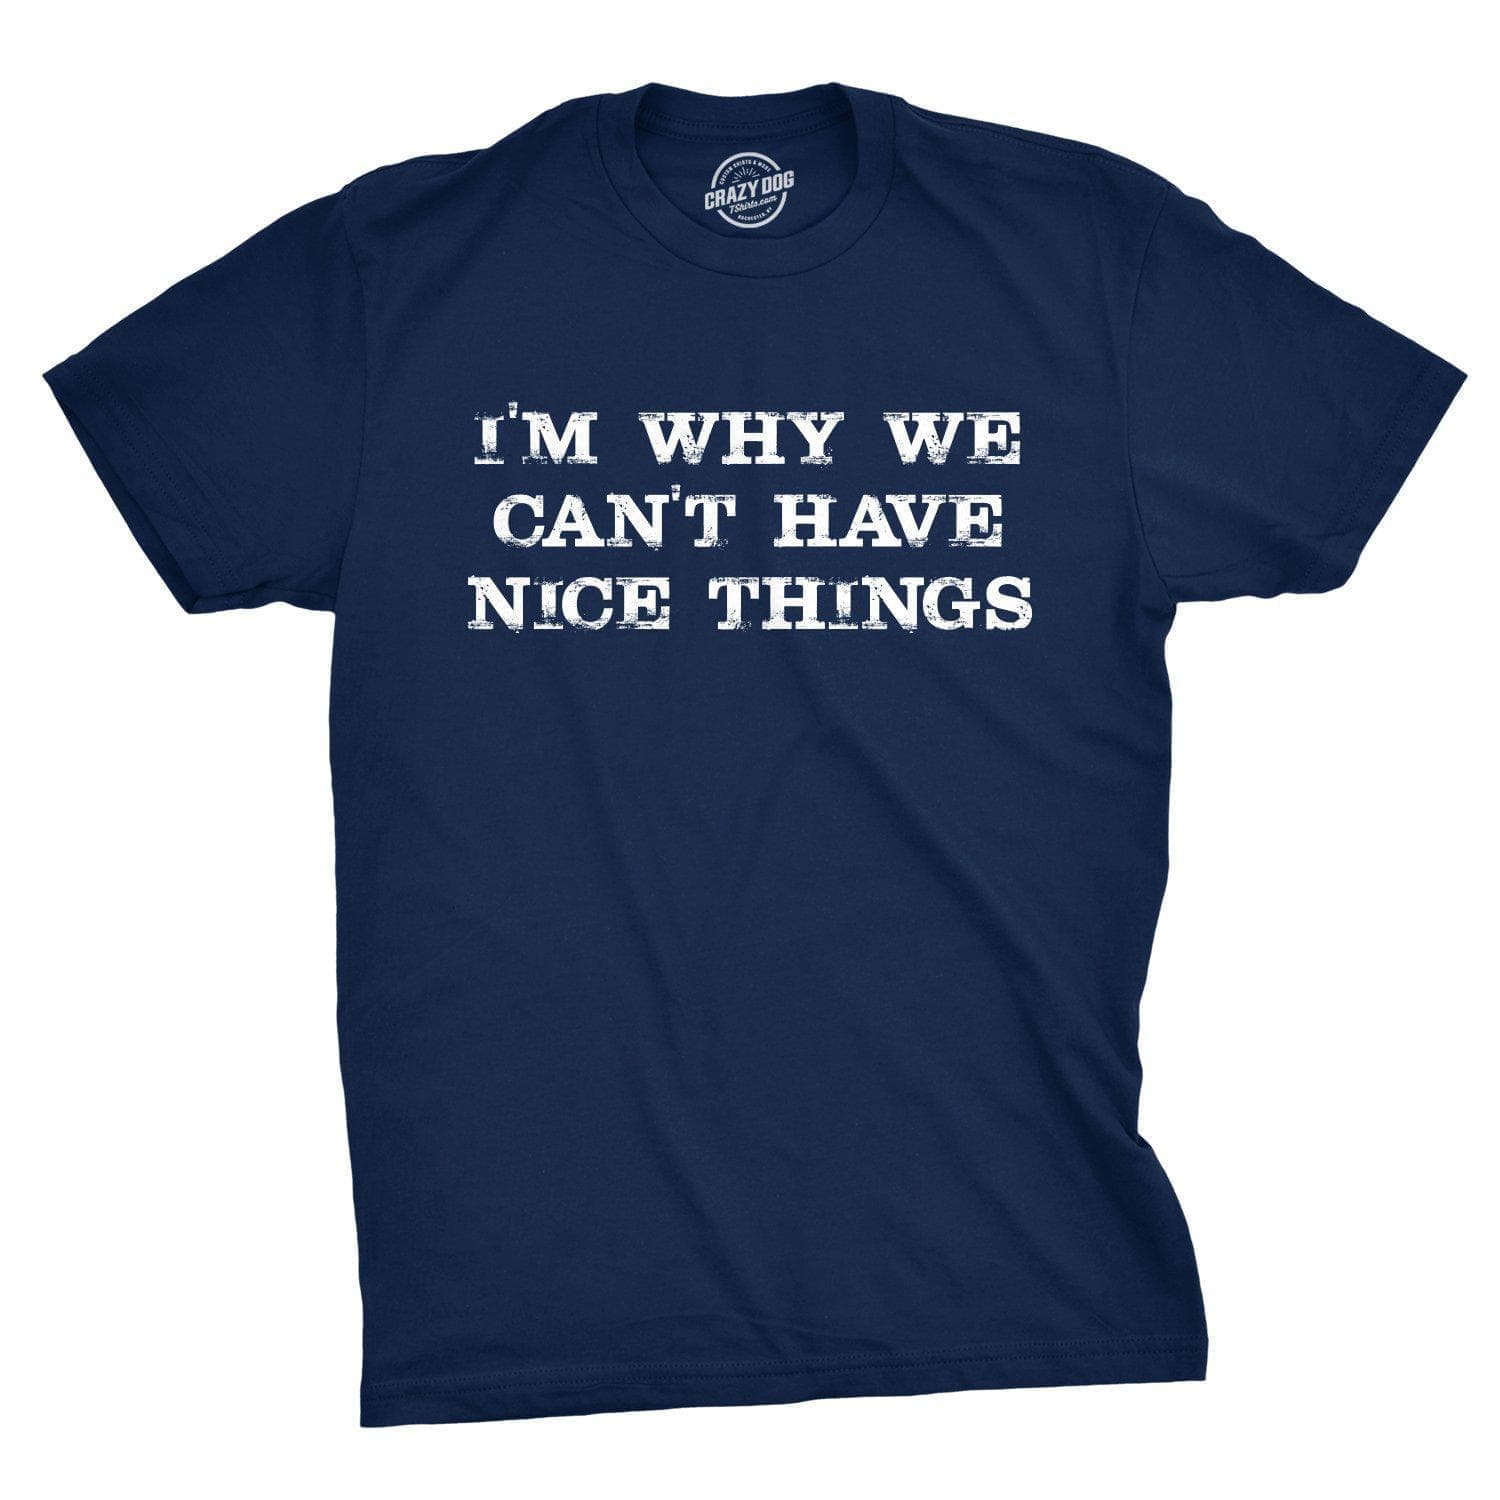 I'm Why We Can't Have Nice Things Men's Tshirt  -  Crazy Dog T-Shirts